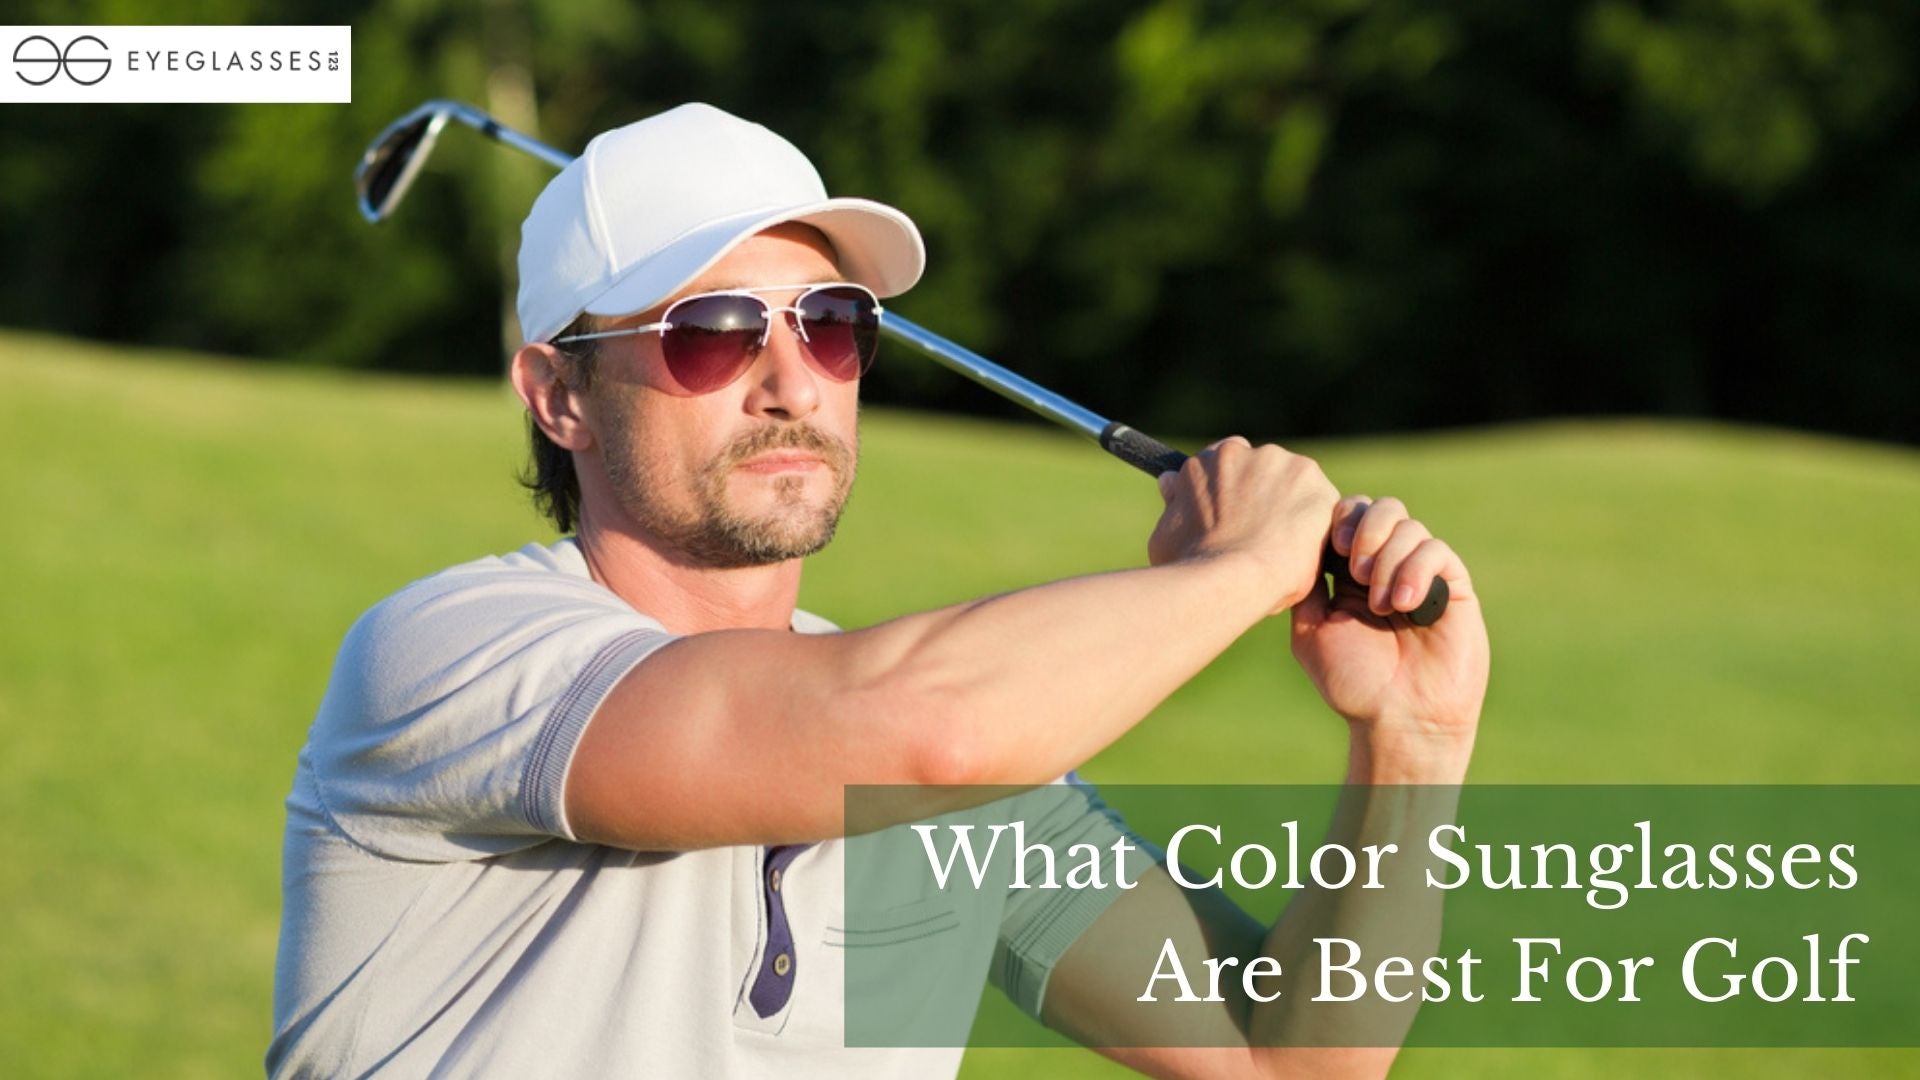 What Color Sunglasses Are Best For Golf